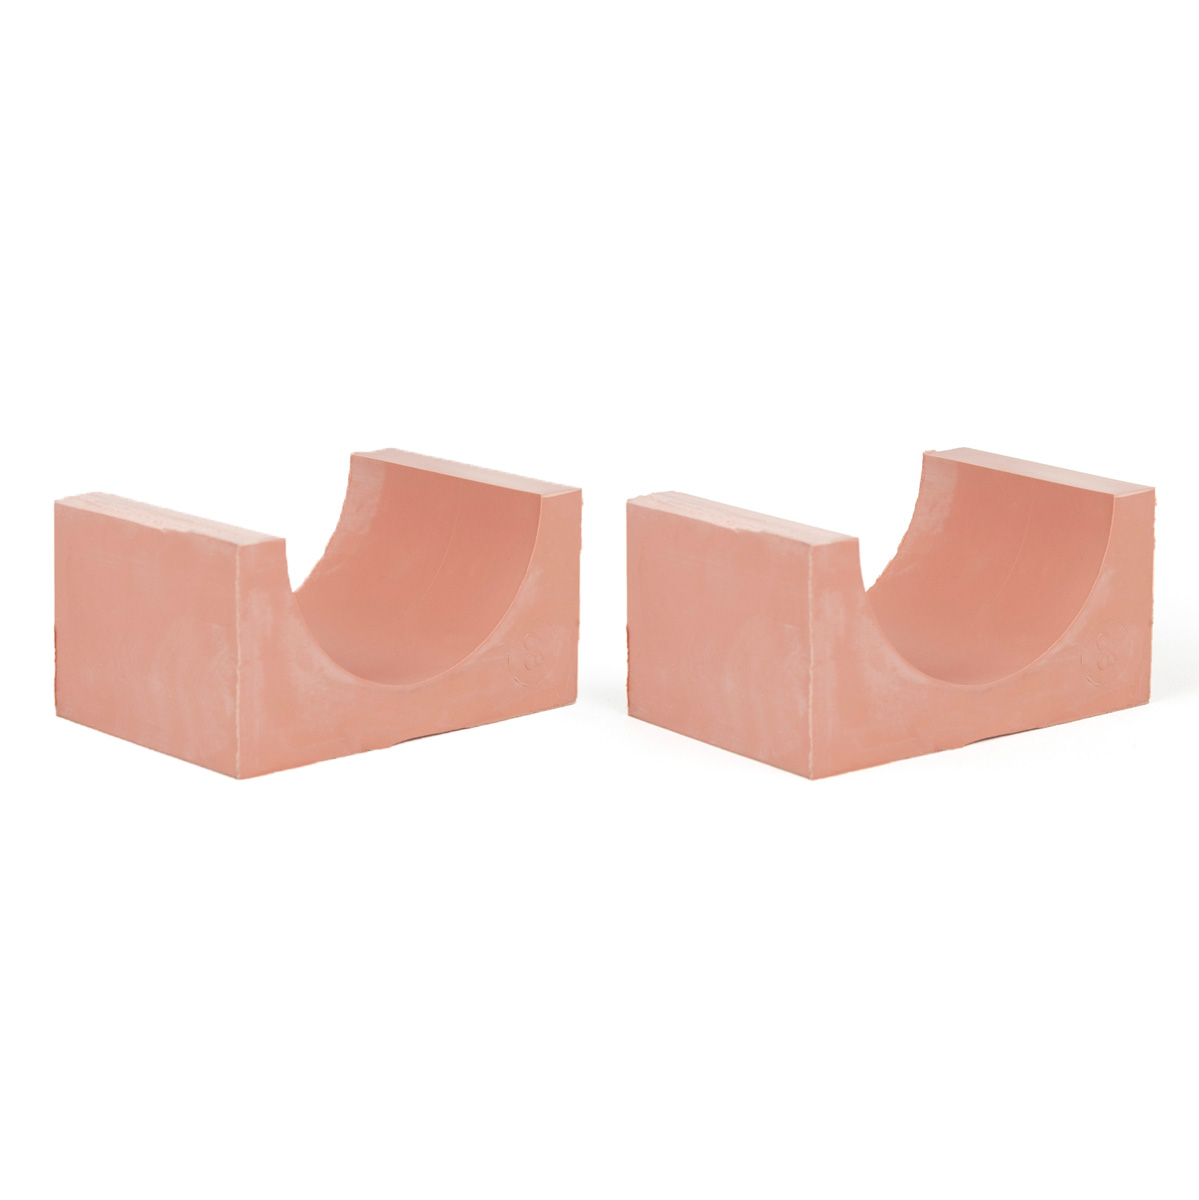 90-68*2 Set of 2 half insert block lycron, 90-68 for cable/pipe diam. 67.5-69.5mm